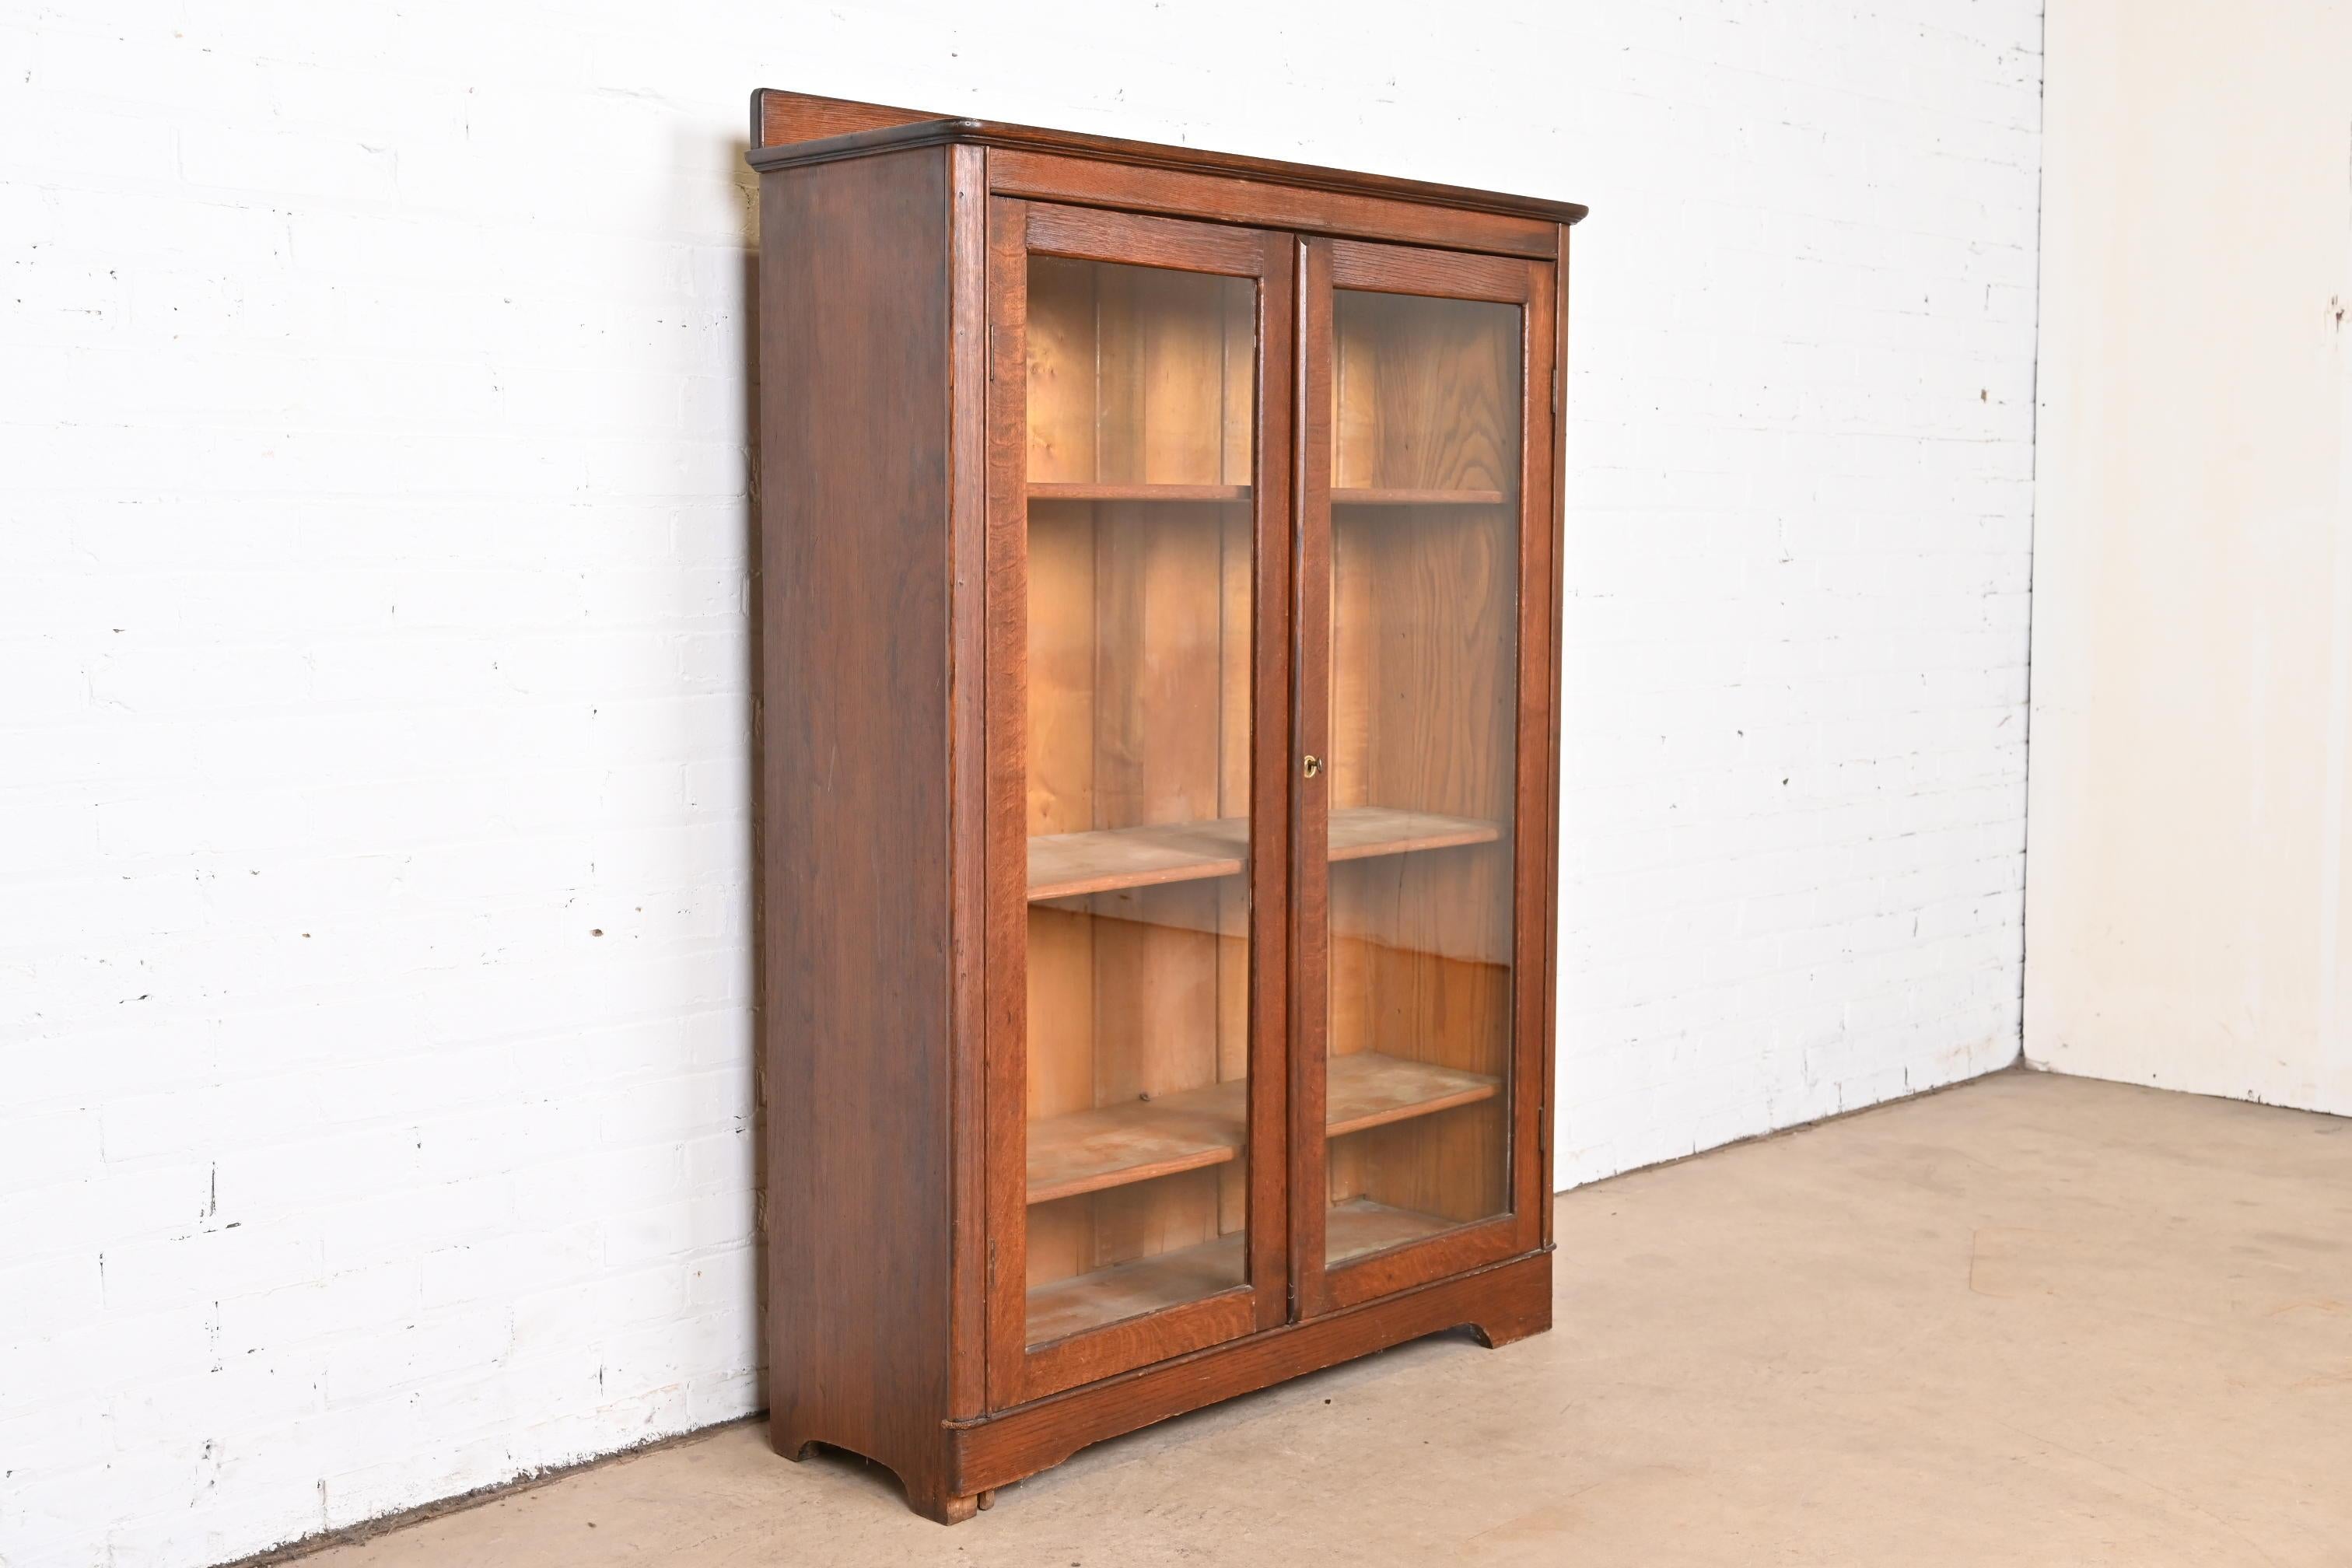 Antique Arts & Crafts Glass Front Bookcase by Larkin Co., Circa 1900 In Good Condition For Sale In South Bend, IN